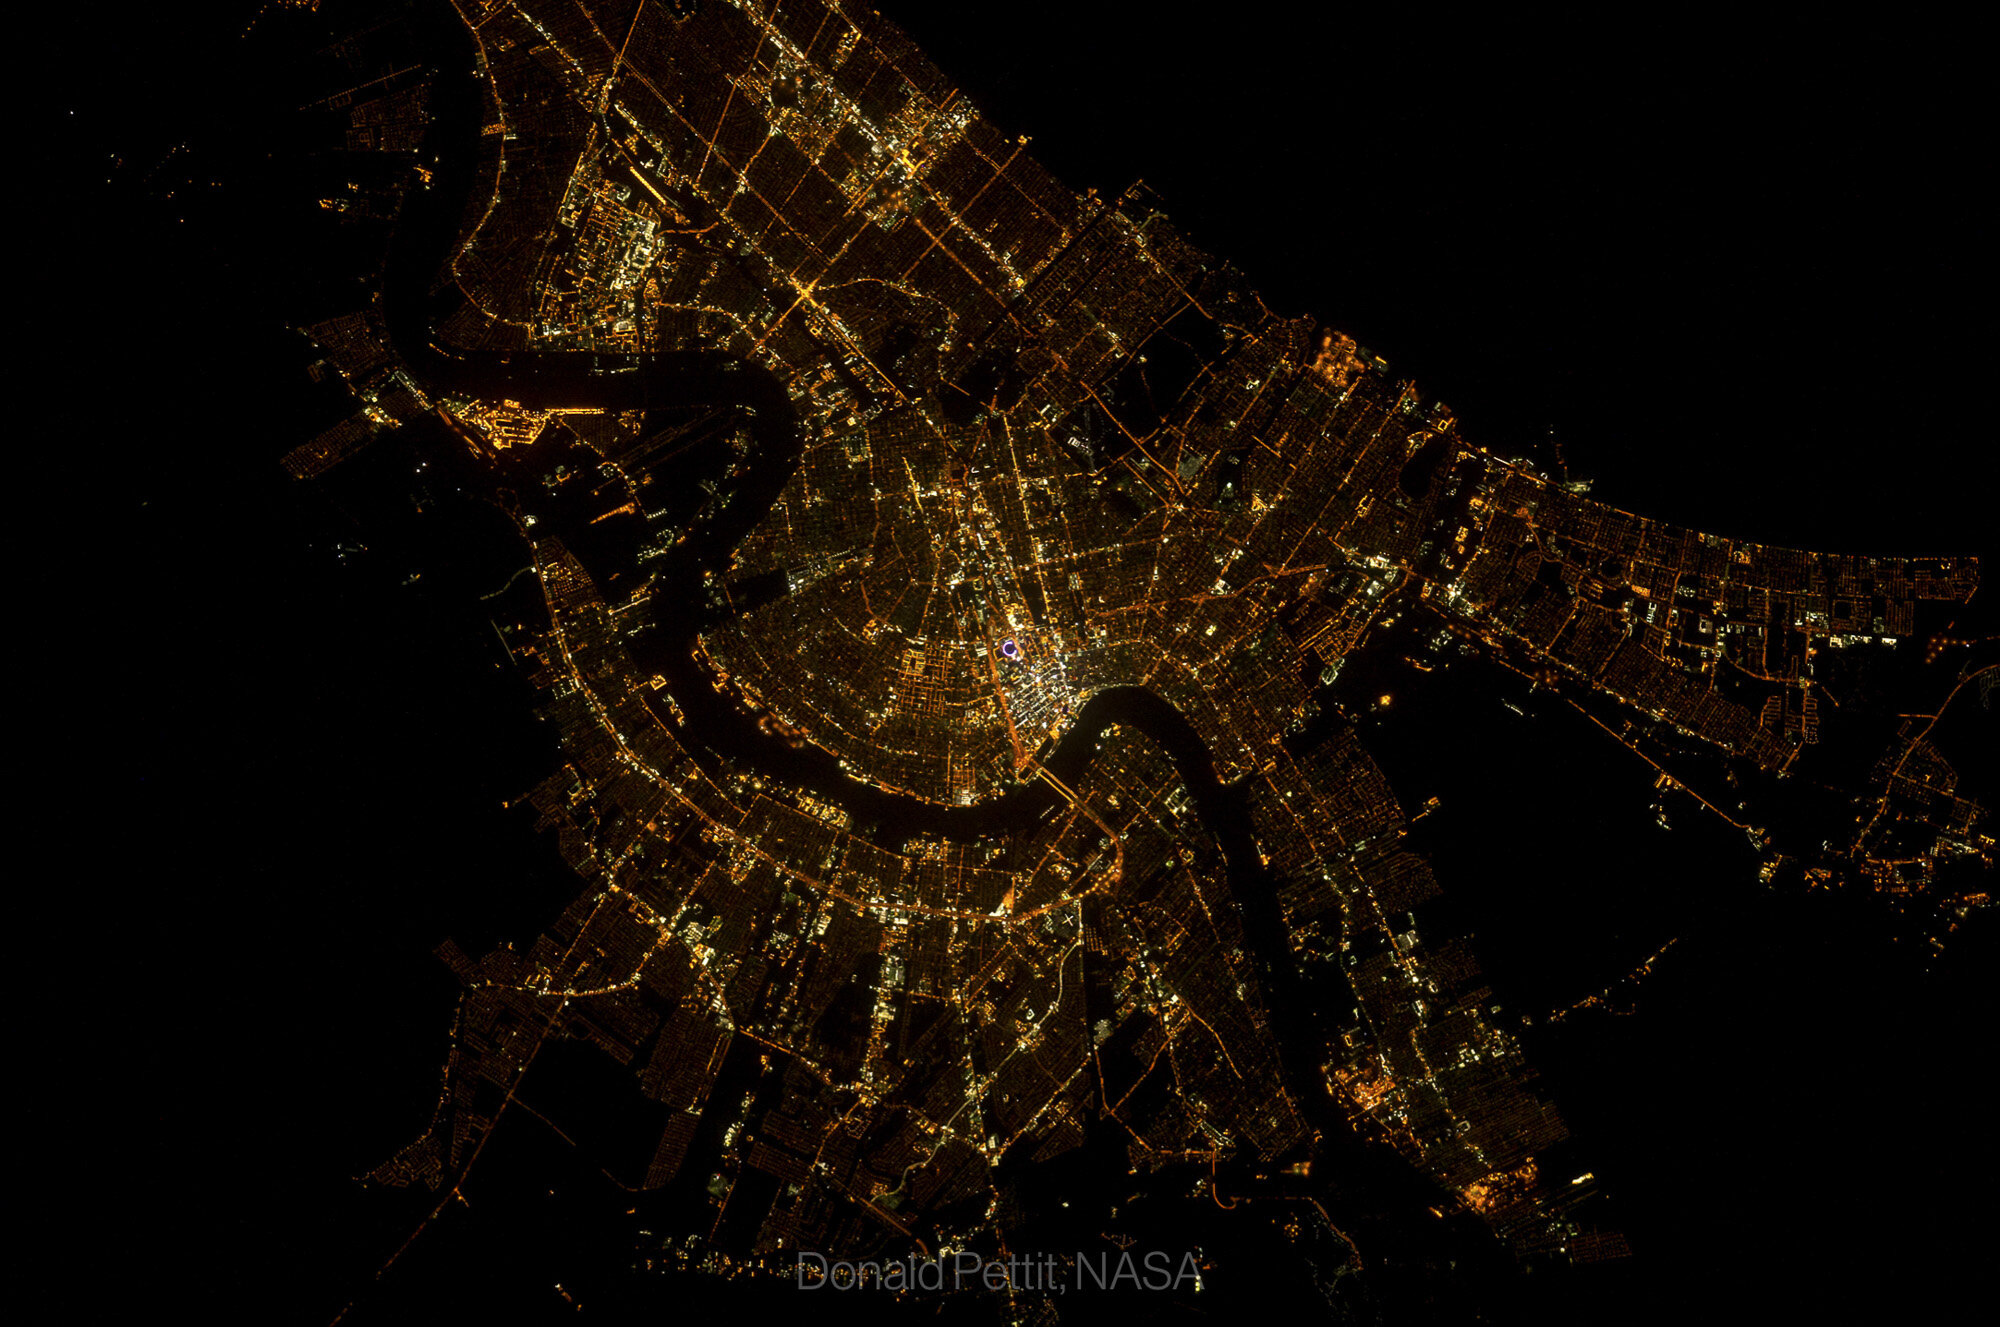 Cities at Night: New Orleans, 2012